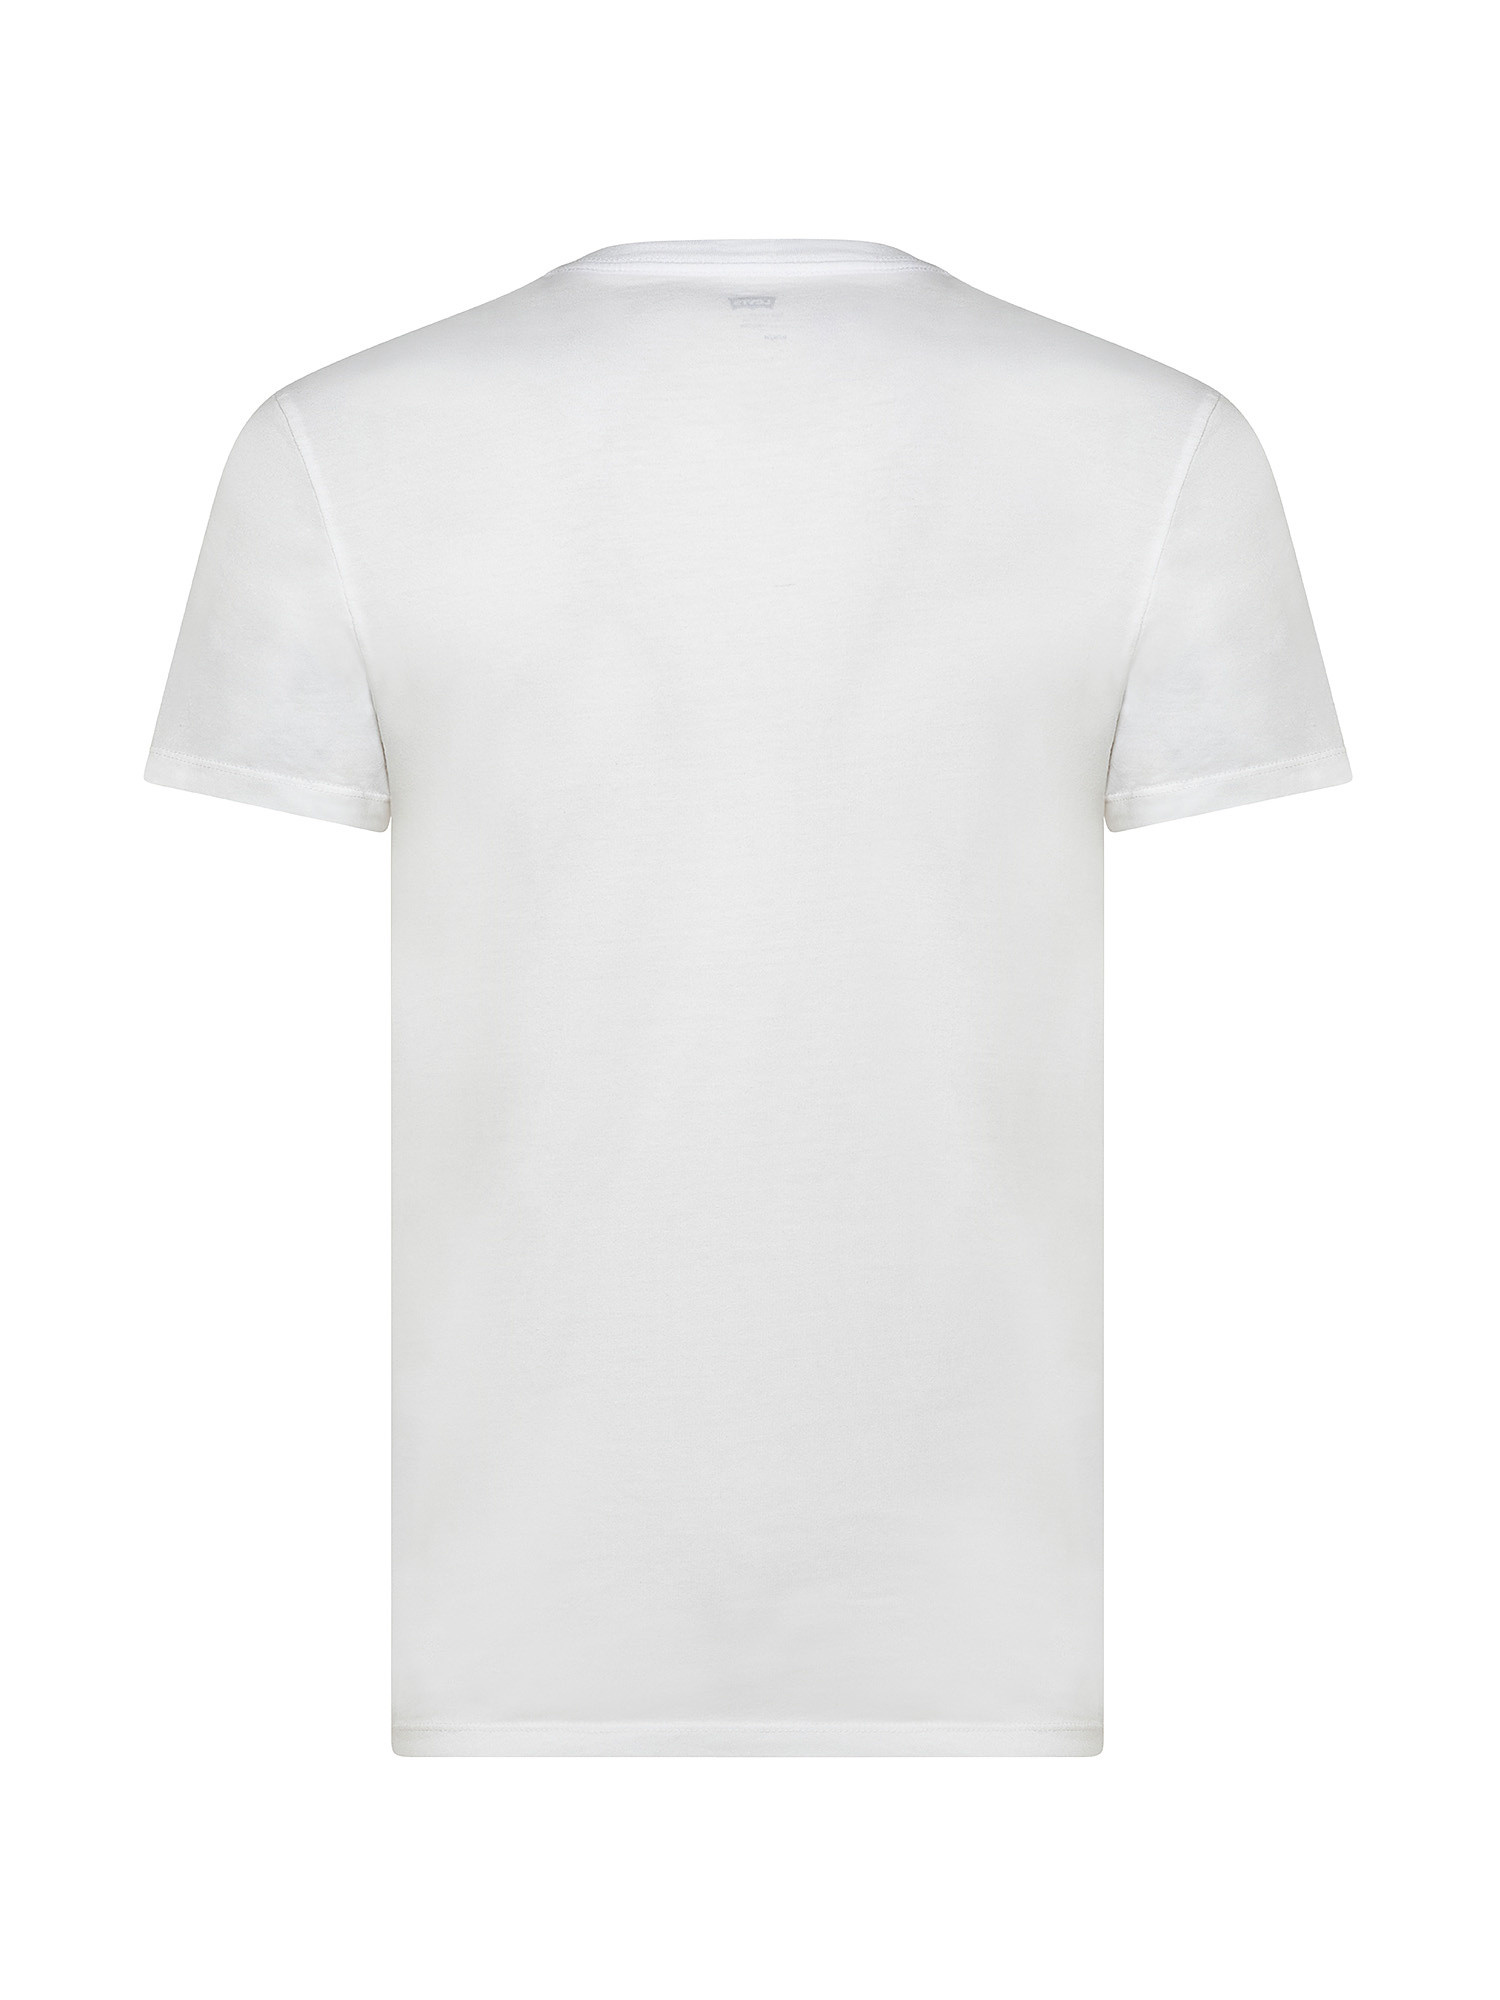 Solid color T-shirt, White, large image number 1